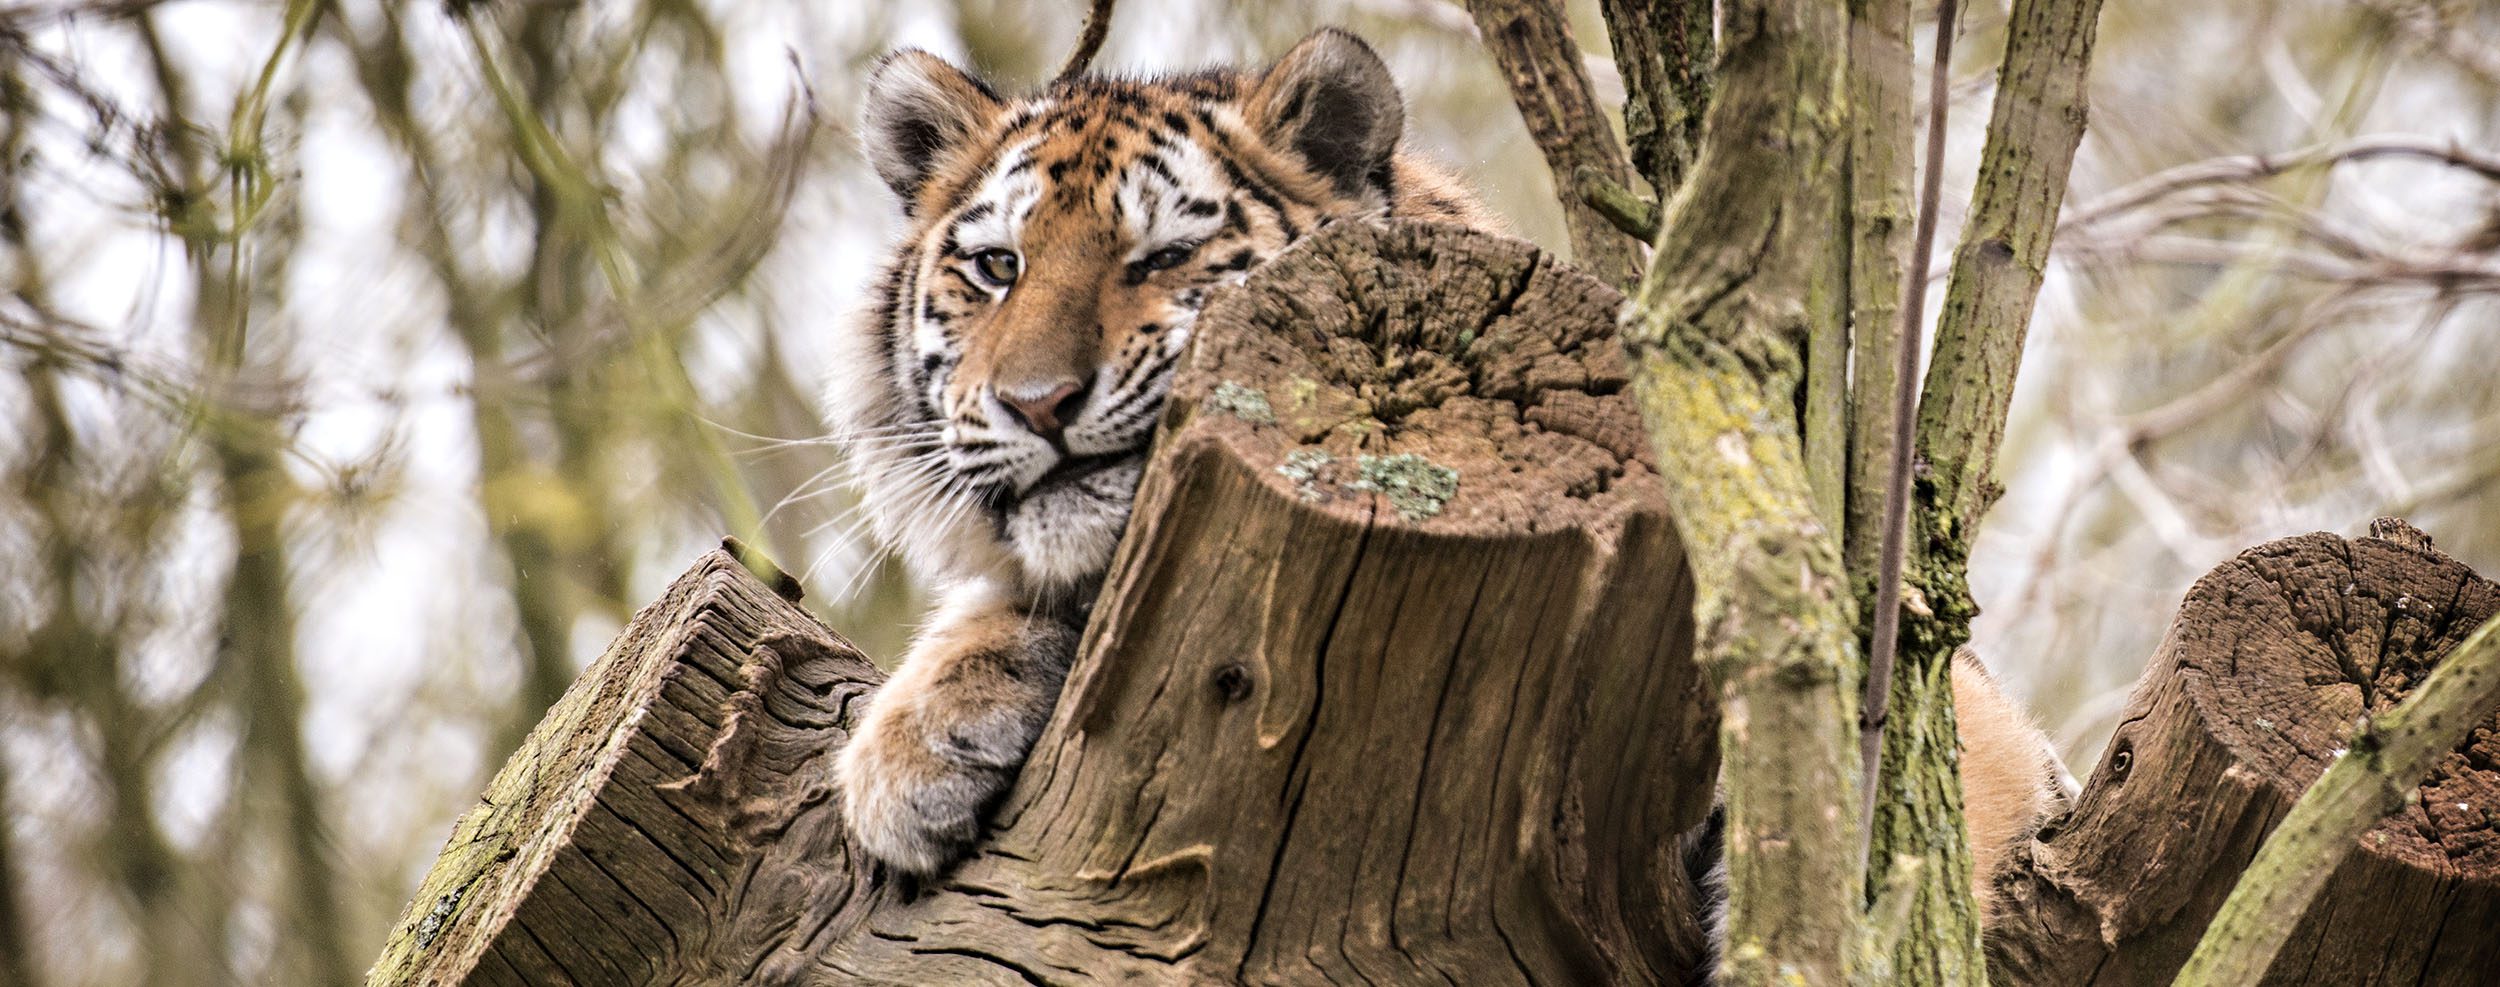 Tiger in a tree